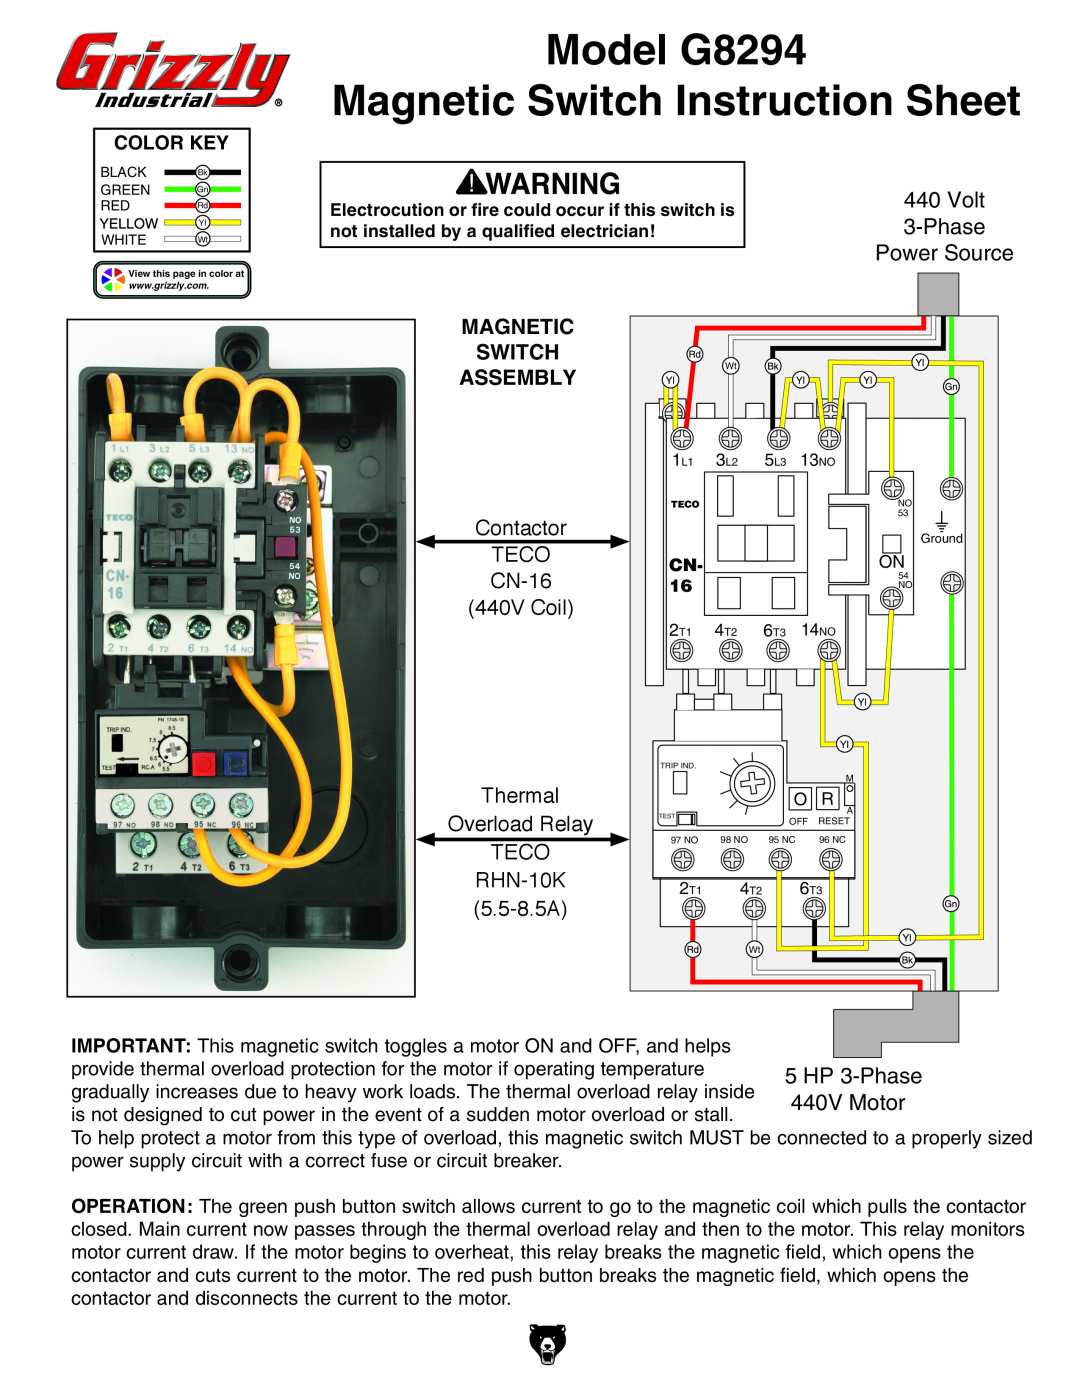 Grizzly instruction sheet Model G8294 Magnetic Switch Instruction Sheet, Magnetic Switch Assembly 